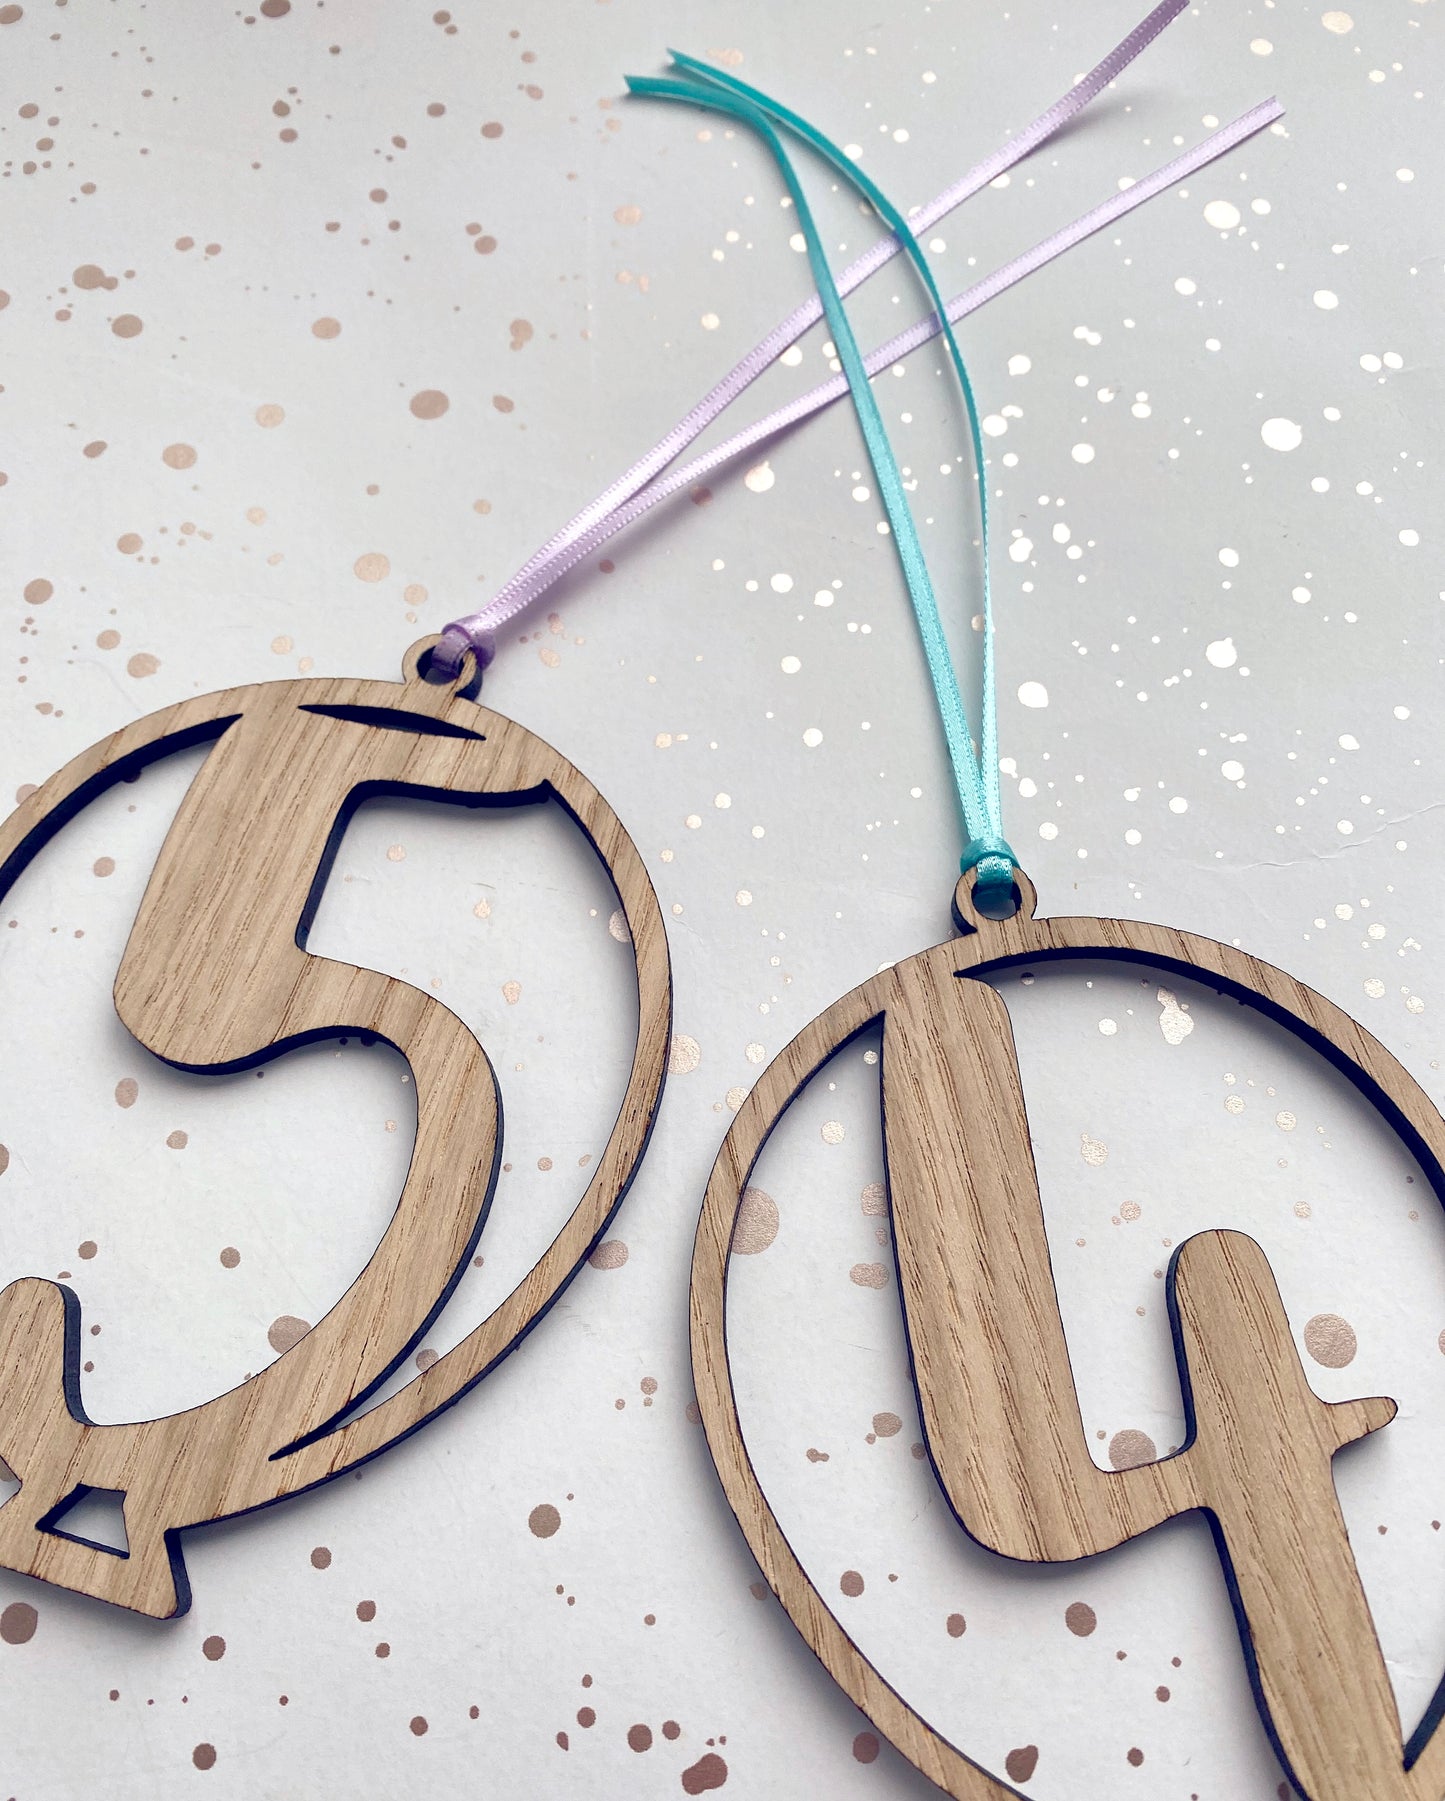 Wooden age birthday gift tags, laser cut from wood in a balloon shape. lilac and mint green ribbons attached